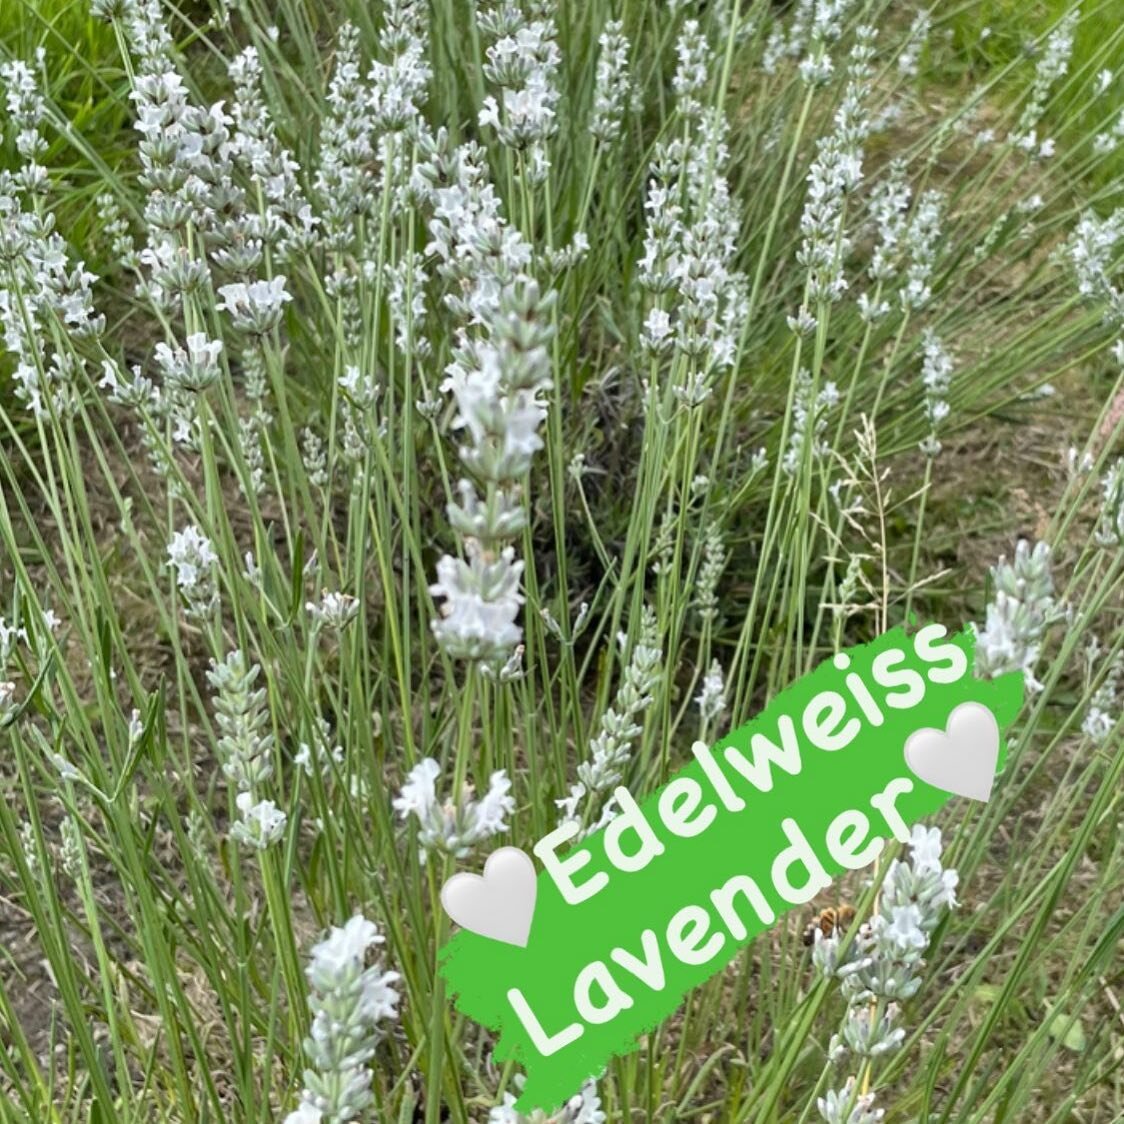 Edelweiss lavender one of the later flowing varieties which is actually a Lavandin rather than lavender. So rather than calming it is uplifting. 
🤍🌱🤍🌱🤍
#edelweisslavender 
#lavender
#lavenderfarm